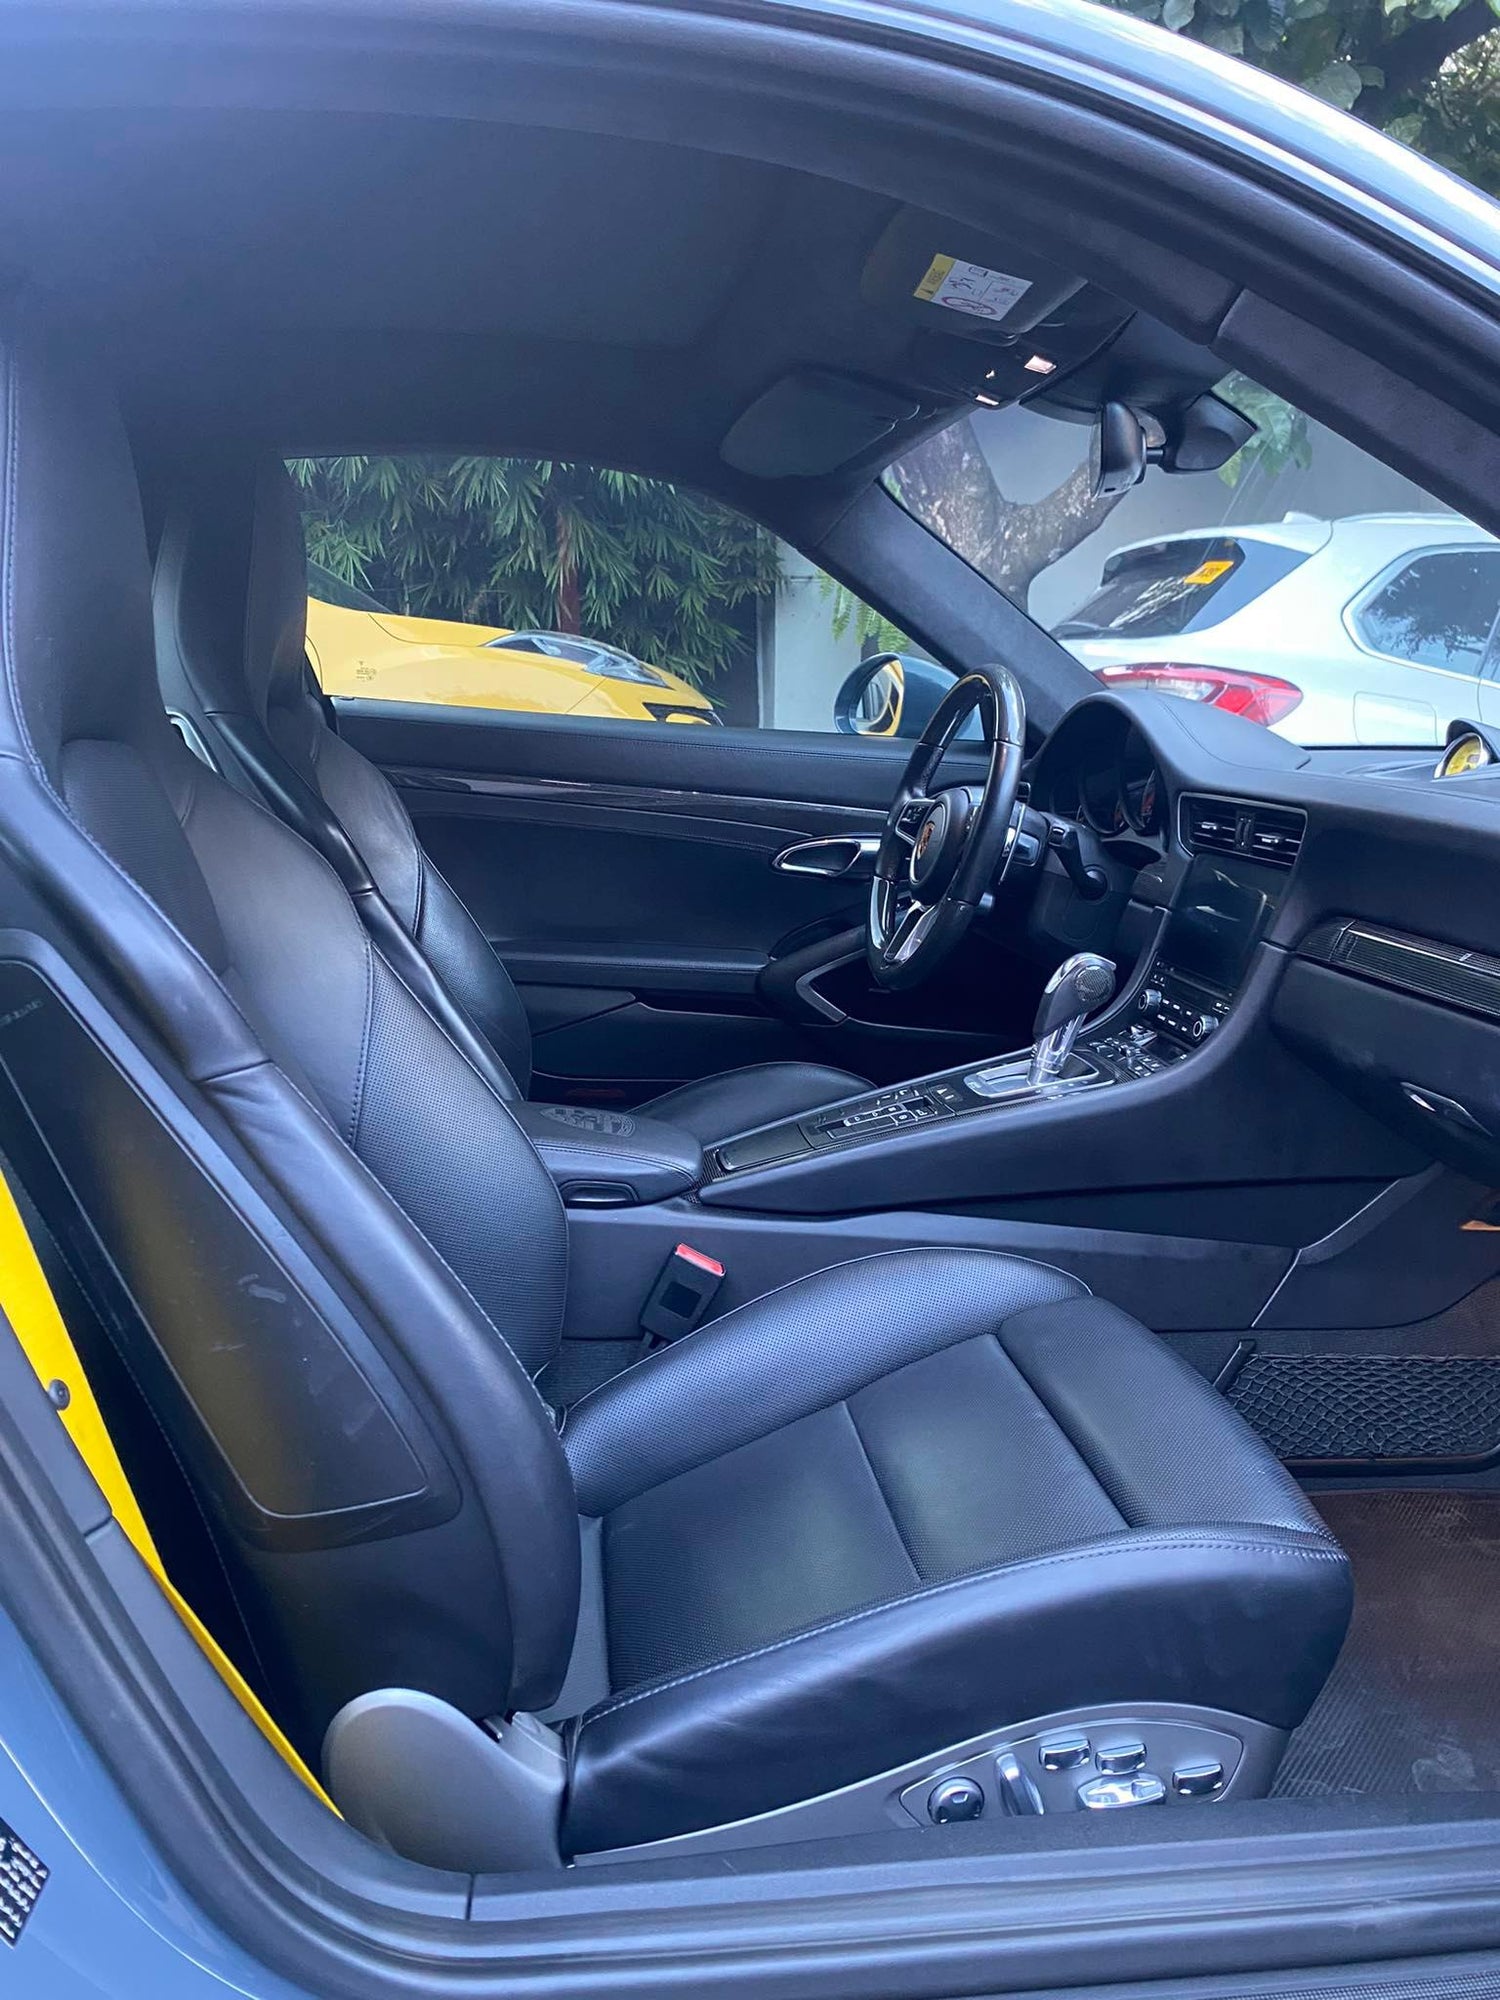 2019 PORSCHE 911 991.2 TURBO S GAS AUTOMATIC TRANSMISSION | Secondhand Used Cars for Sale at Manila Auto Display.